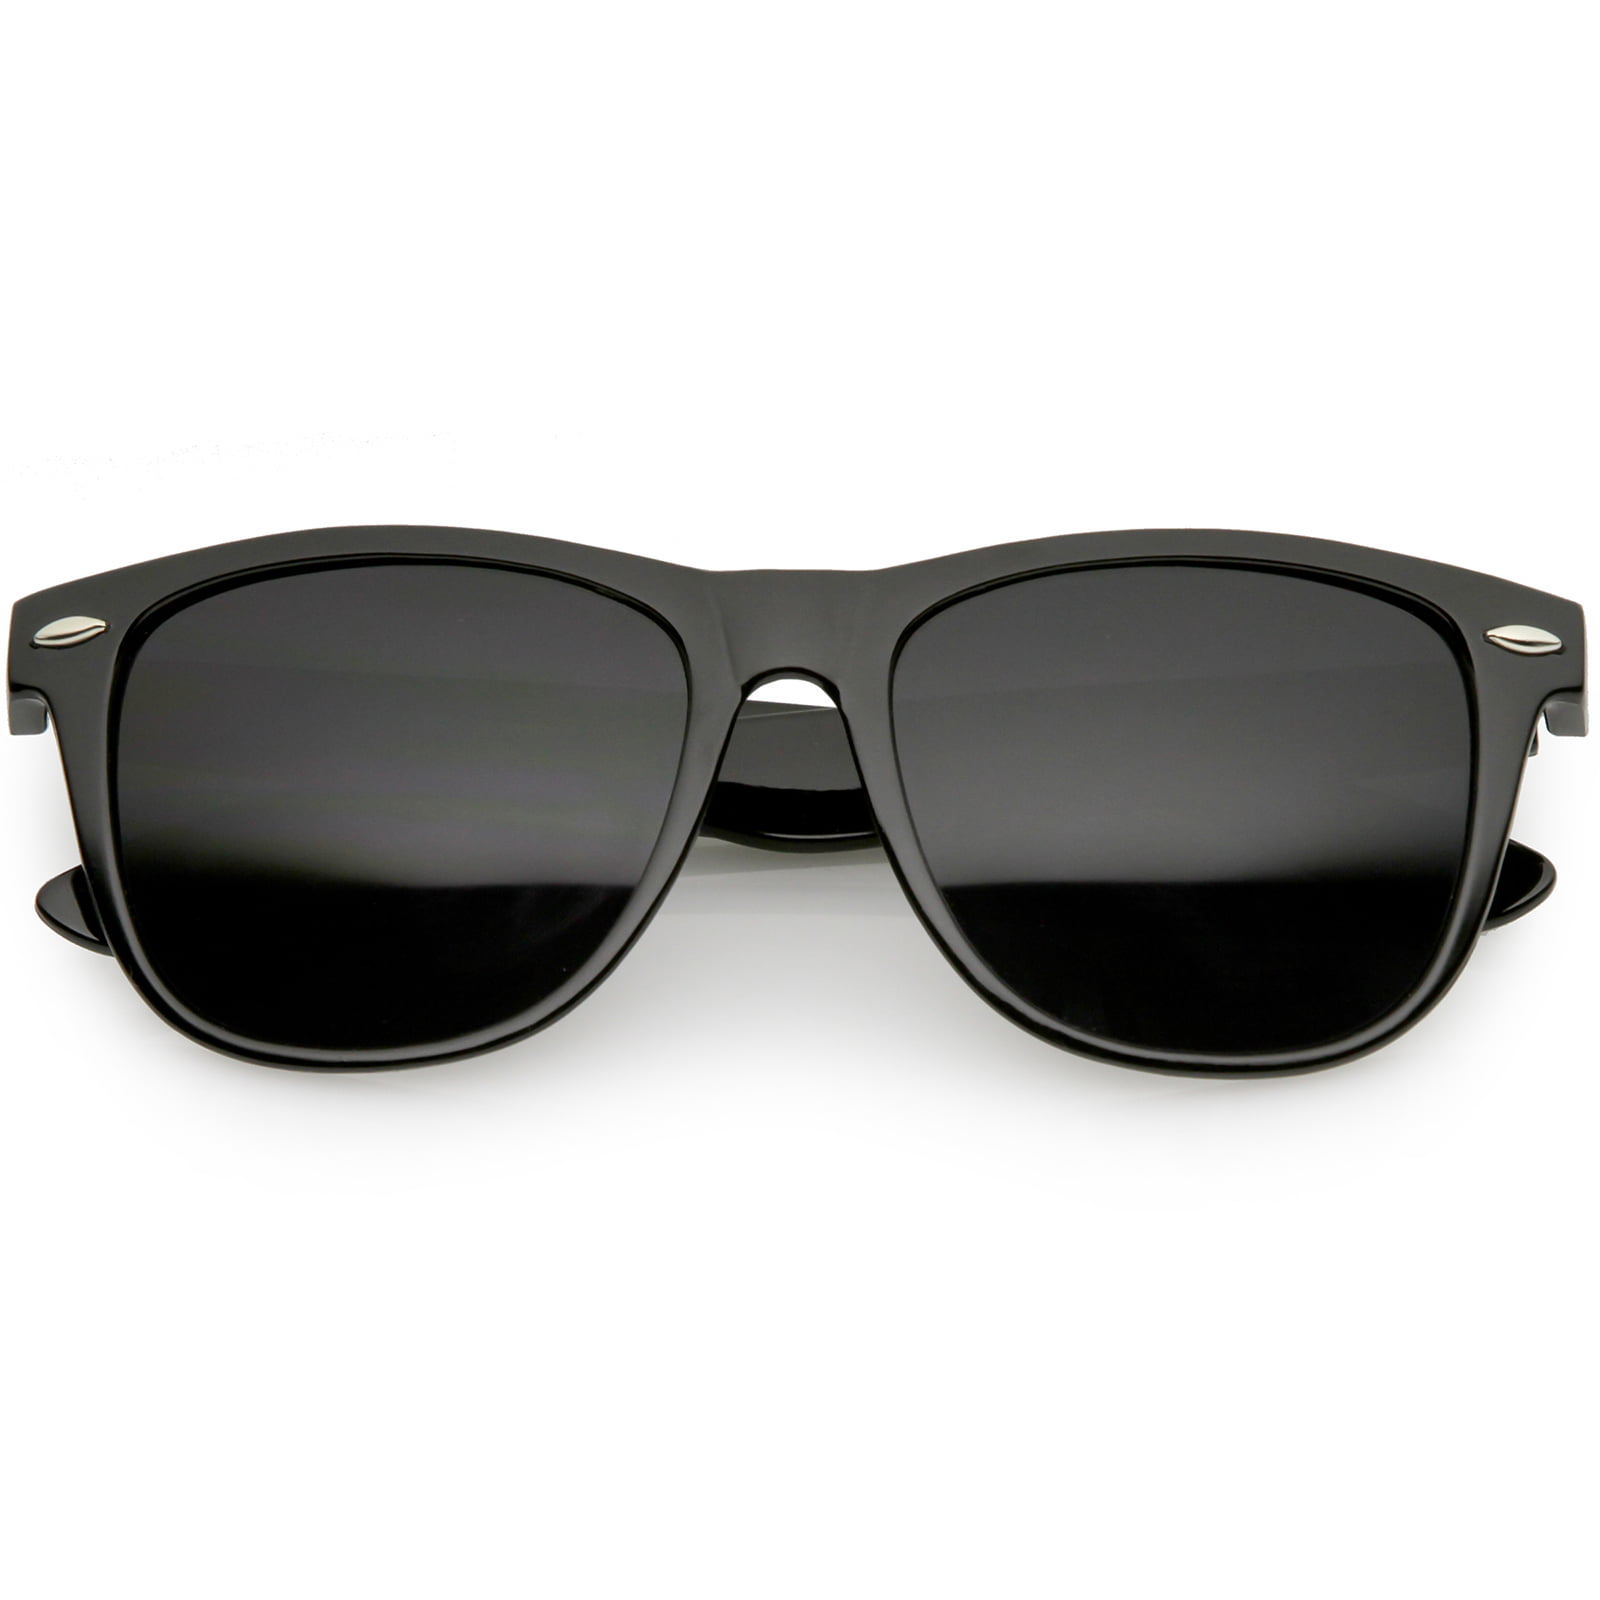 Classic Horn Rimmed Sunglasses Wide Arms Super Dark Square Lens 54mm ...